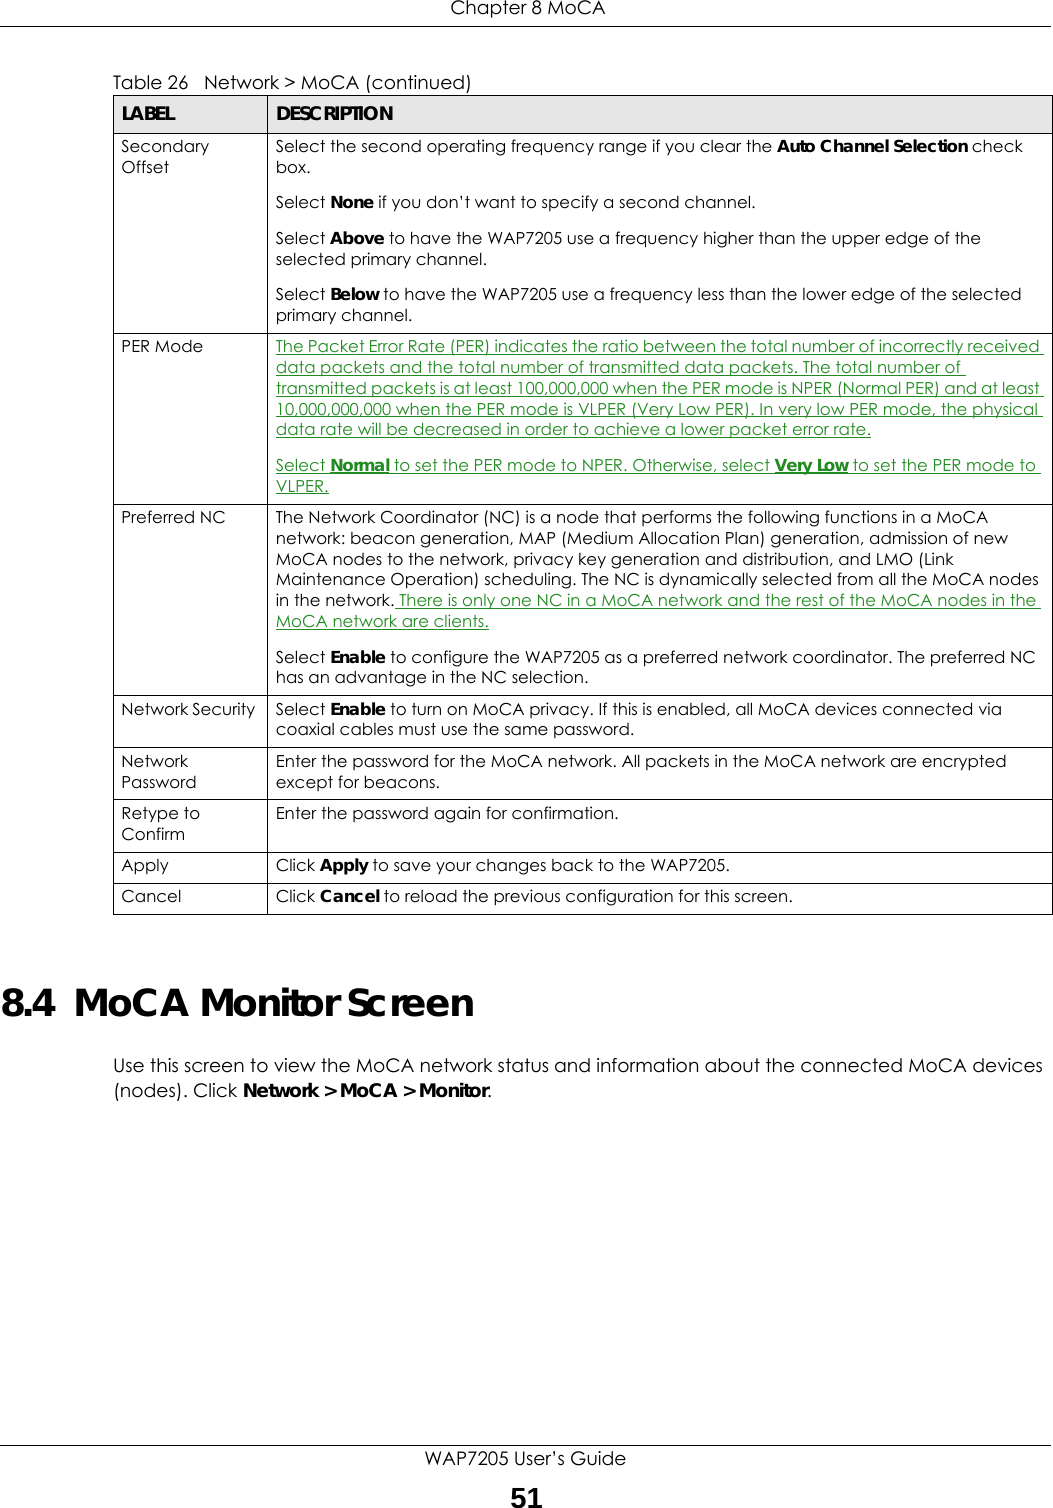  Chapter 8 MoCAWAP7205 User’s Guide518.4  MoCA Monitor ScreenUse this screen to view the MoCA network status and information about the connected MoCA devices (nodes). Click Network &gt; MoCA &gt; Monitor.Secondary OffsetSelect the second operating frequency range if you clear the Auto Channel Selection check box.Select None if you don’t want to specify a second channel.Select Above to have the WAP7205 use a frequency higher than the upper edge of the selected primary channel.Select Below to have the WAP7205 use a frequency less than the lower edge of the selected primary channel.PER Mode The Packet Error Rate (PER) indicates the ratio between the total number of incorrectly received data packets and the total number of transmitted data packets. The total number of transmitted packets is at least 100,000,000 when the PER mode is NPER (Normal PER) and at least 10,000,000,000 when the PER mode is VLPER (Very Low PER). In very low PER mode, the physical data rate will be decreased in order to achieve a lower packet error rate.Select Normal to set the PER mode to NPER. Otherwise, select Very Low to set the PER mode to VLPER.Preferred NC The Network Coordinator (NC) is a node that performs the following functions in a MoCA network: beacon generation, MAP (Medium Allocation Plan) generation, admission of new MoCA nodes to the network, privacy key generation and distribution, and LMO (Link Maintenance Operation) scheduling. The NC is dynamically selected from all the MoCA nodes in the network. There is only one NC in a MoCA network and the rest of the MoCA nodes in the MoCA network are clients.Select Enable to configure the WAP7205 as a preferred network coordinator. The preferred NC has an advantage in the NC selection.Network Security  Select Enable to turn on MoCA privacy. If this is enabled, all MoCA devices connected via coaxial cables must use the same password.Network PasswordEnter the password for the MoCA network. All packets in the MoCA network are encrypted except for beacons.Retype to ConfirmEnter the password again for confirmation.Apply Click Apply to save your changes back to the WAP7205.Cancel Click Cancel to reload the previous configuration for this screen.Table 26   Network &gt; MoCA (continued)LABEL DESCRIPTION